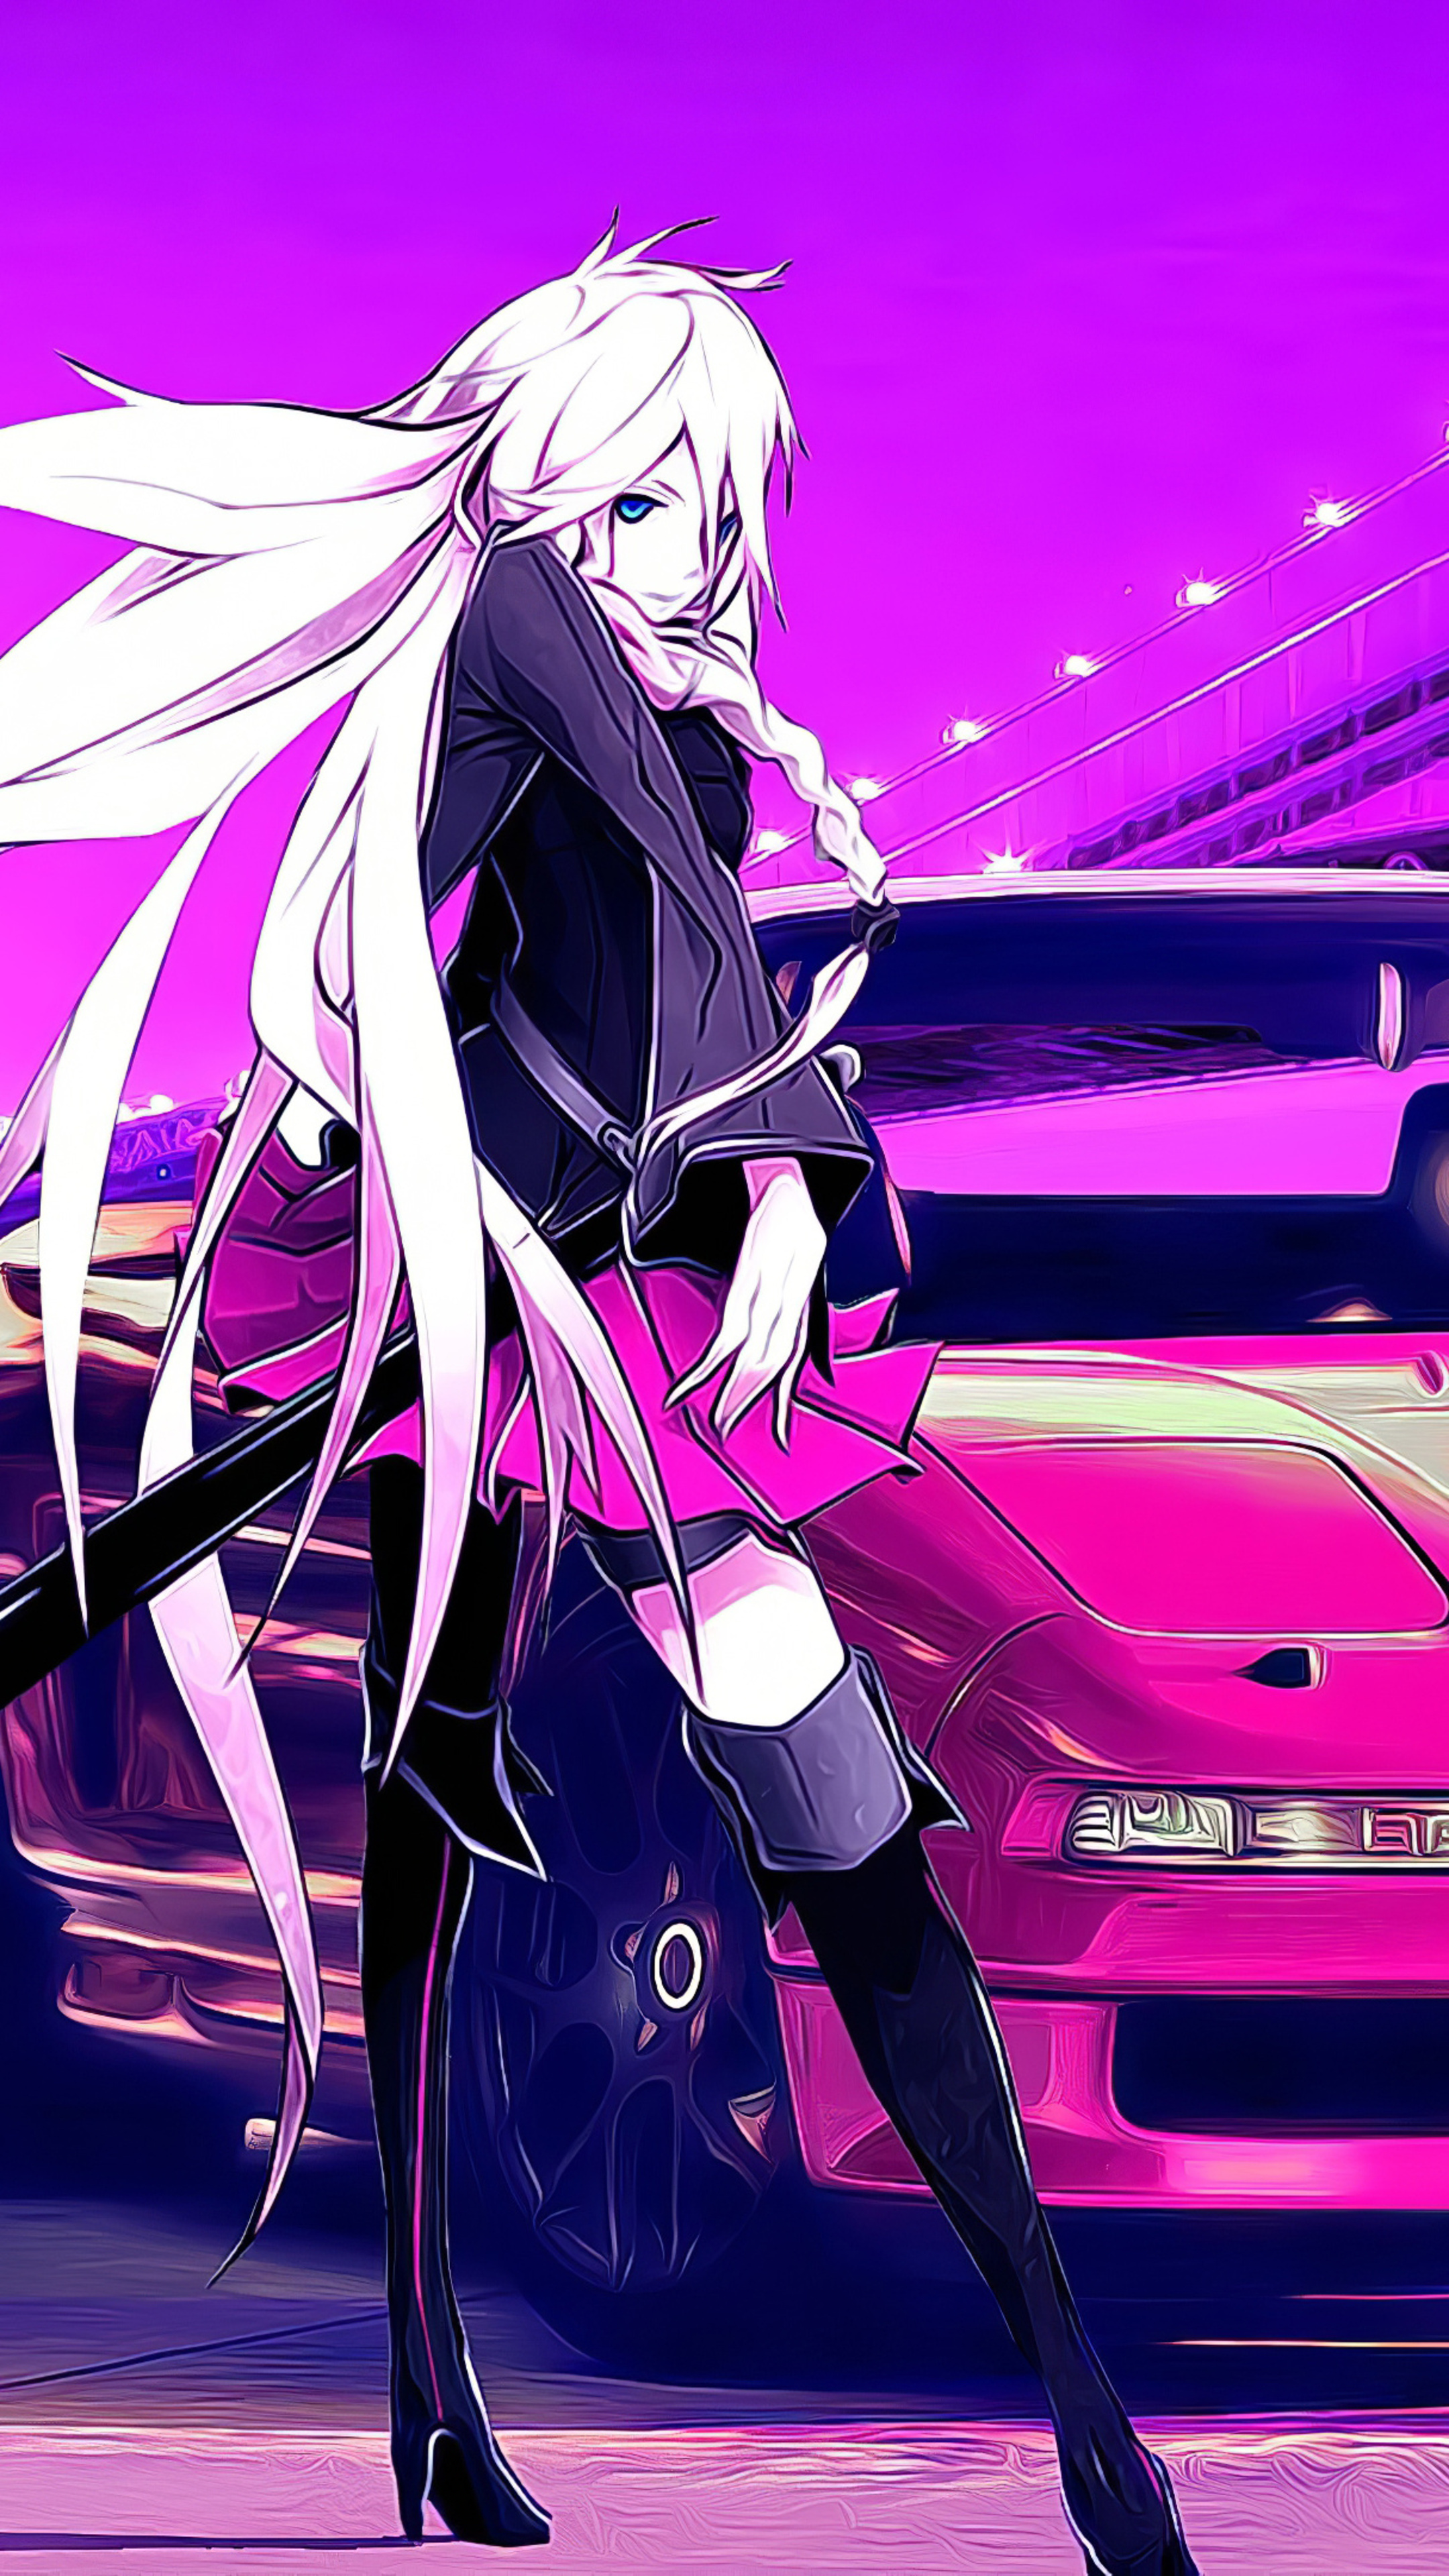 IA Vocaloid, Anime character, 4K wallpapers, Vocaloid enthusiasts, 2160x3840 4K Phone